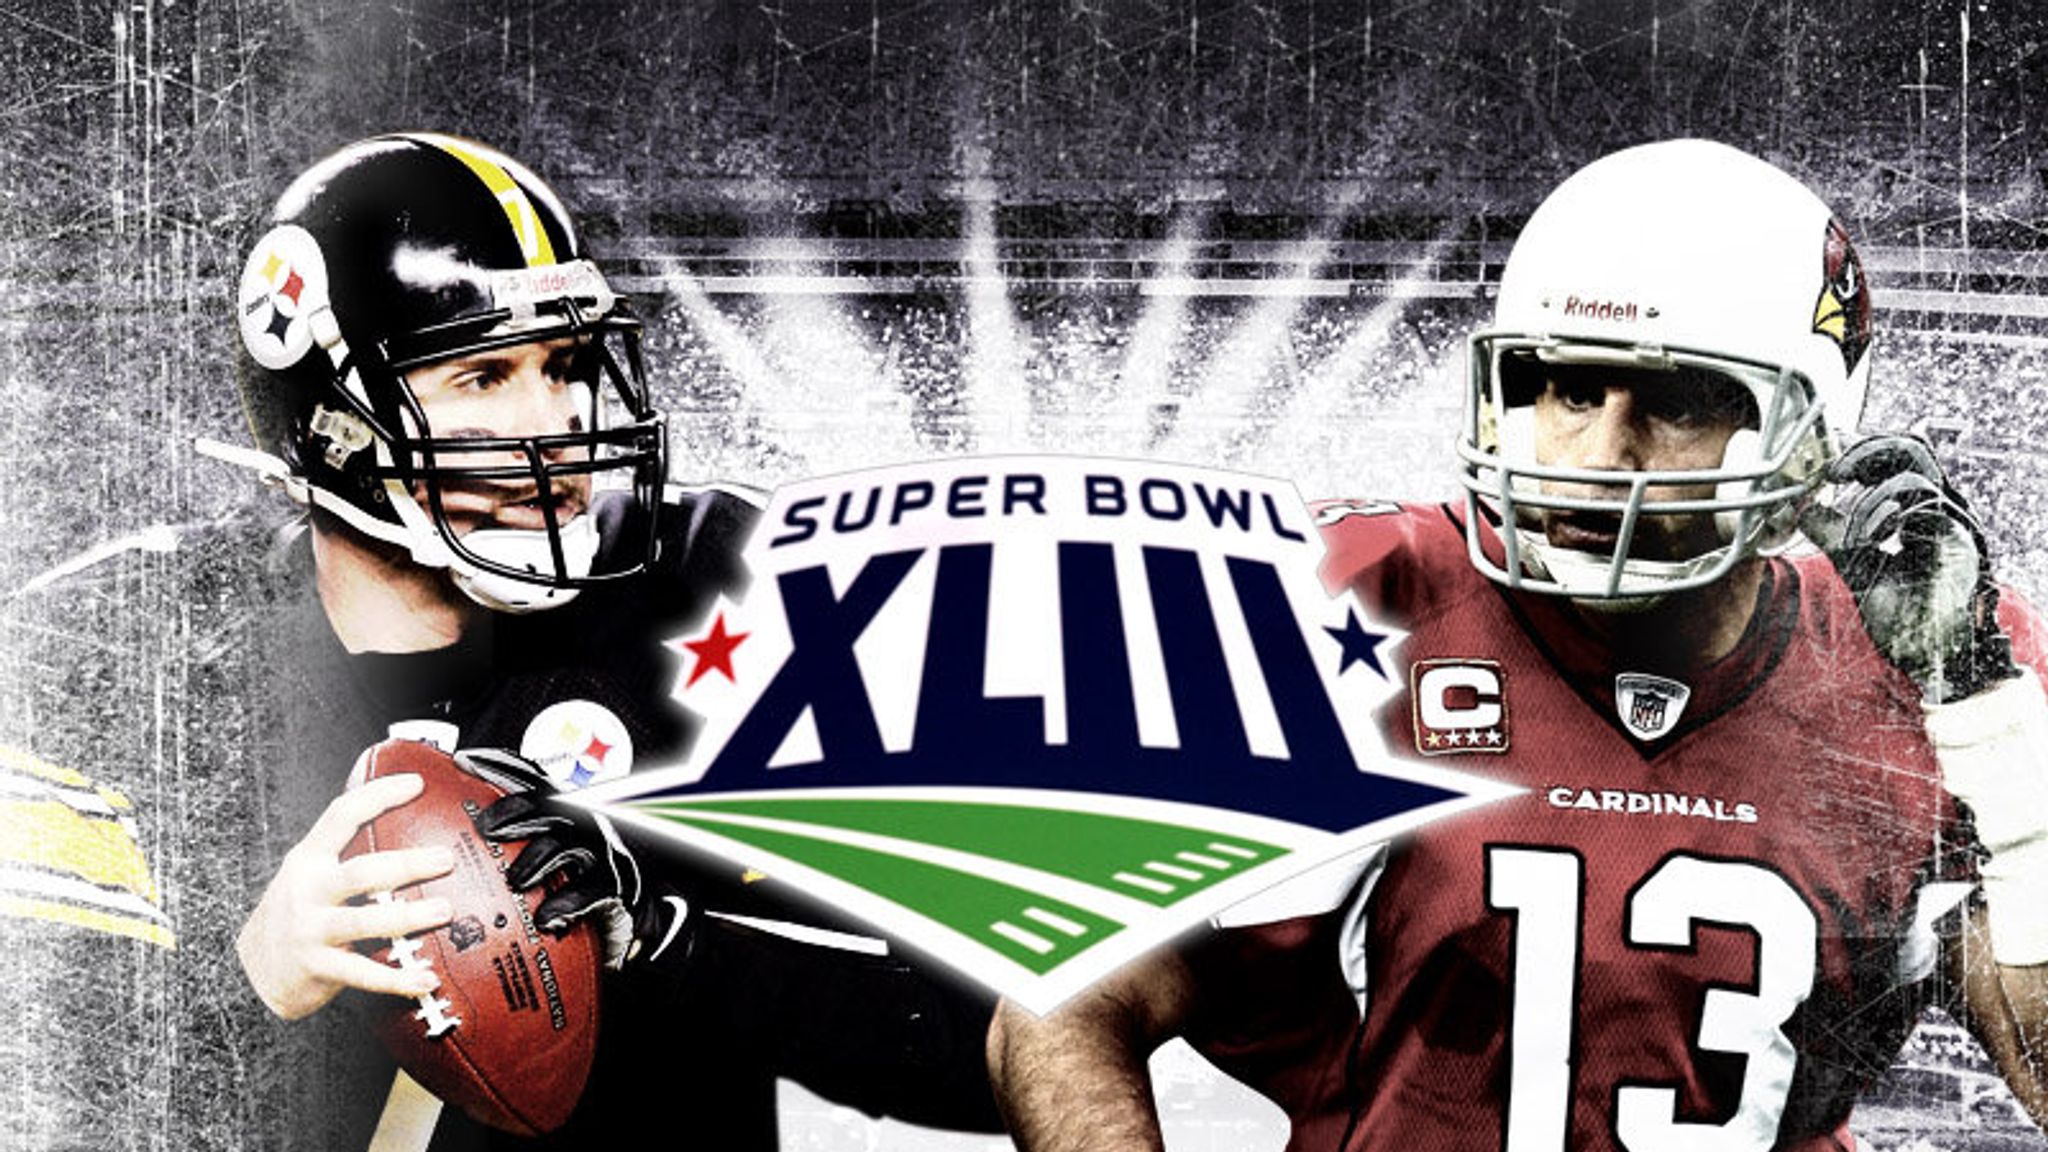 steelers and cardinals super bowl